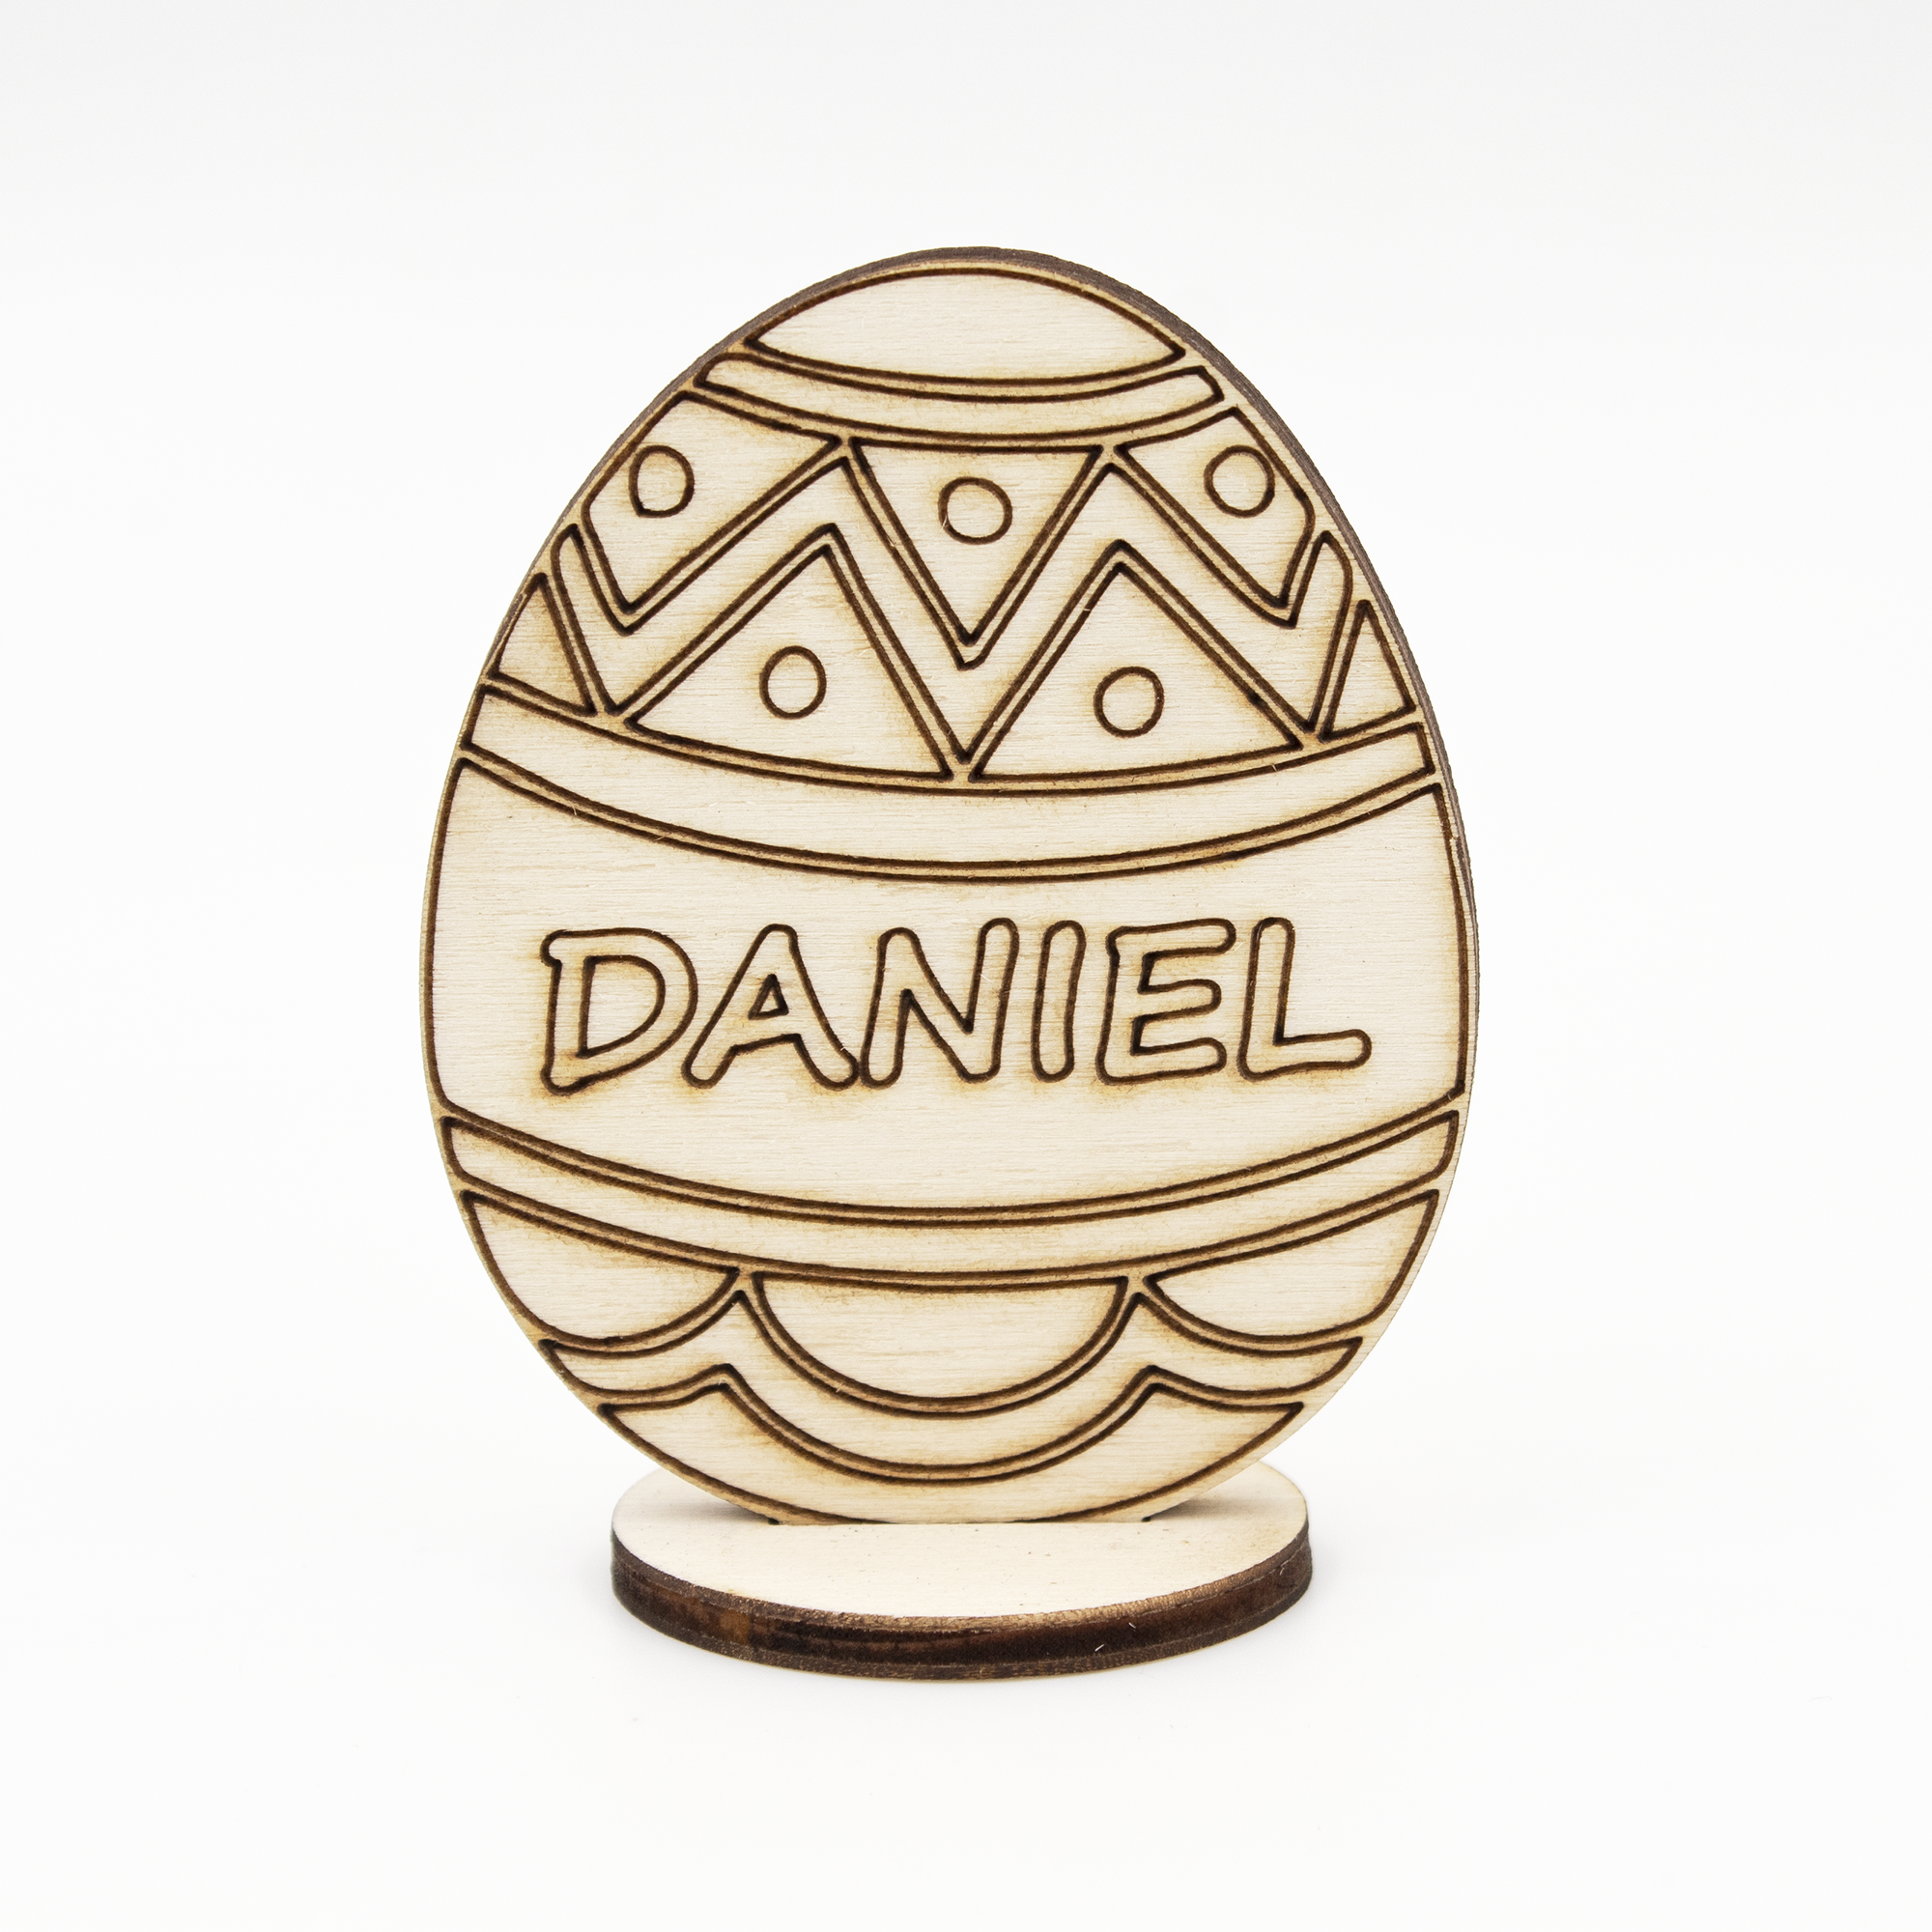 Enhance your Easter celebration with our custom wooden Easter egg stand on a base. Made from high-quality wood, this stylish and durable stand is perfect for displaying your personalized Easter egg. Engrave it with a name or message of your choice for a unique gift that will be cherished for years to come. Whether used as a centerpiece or accent piece for your home decor, this wooden egg stand is sure to impress. Material: Wood.